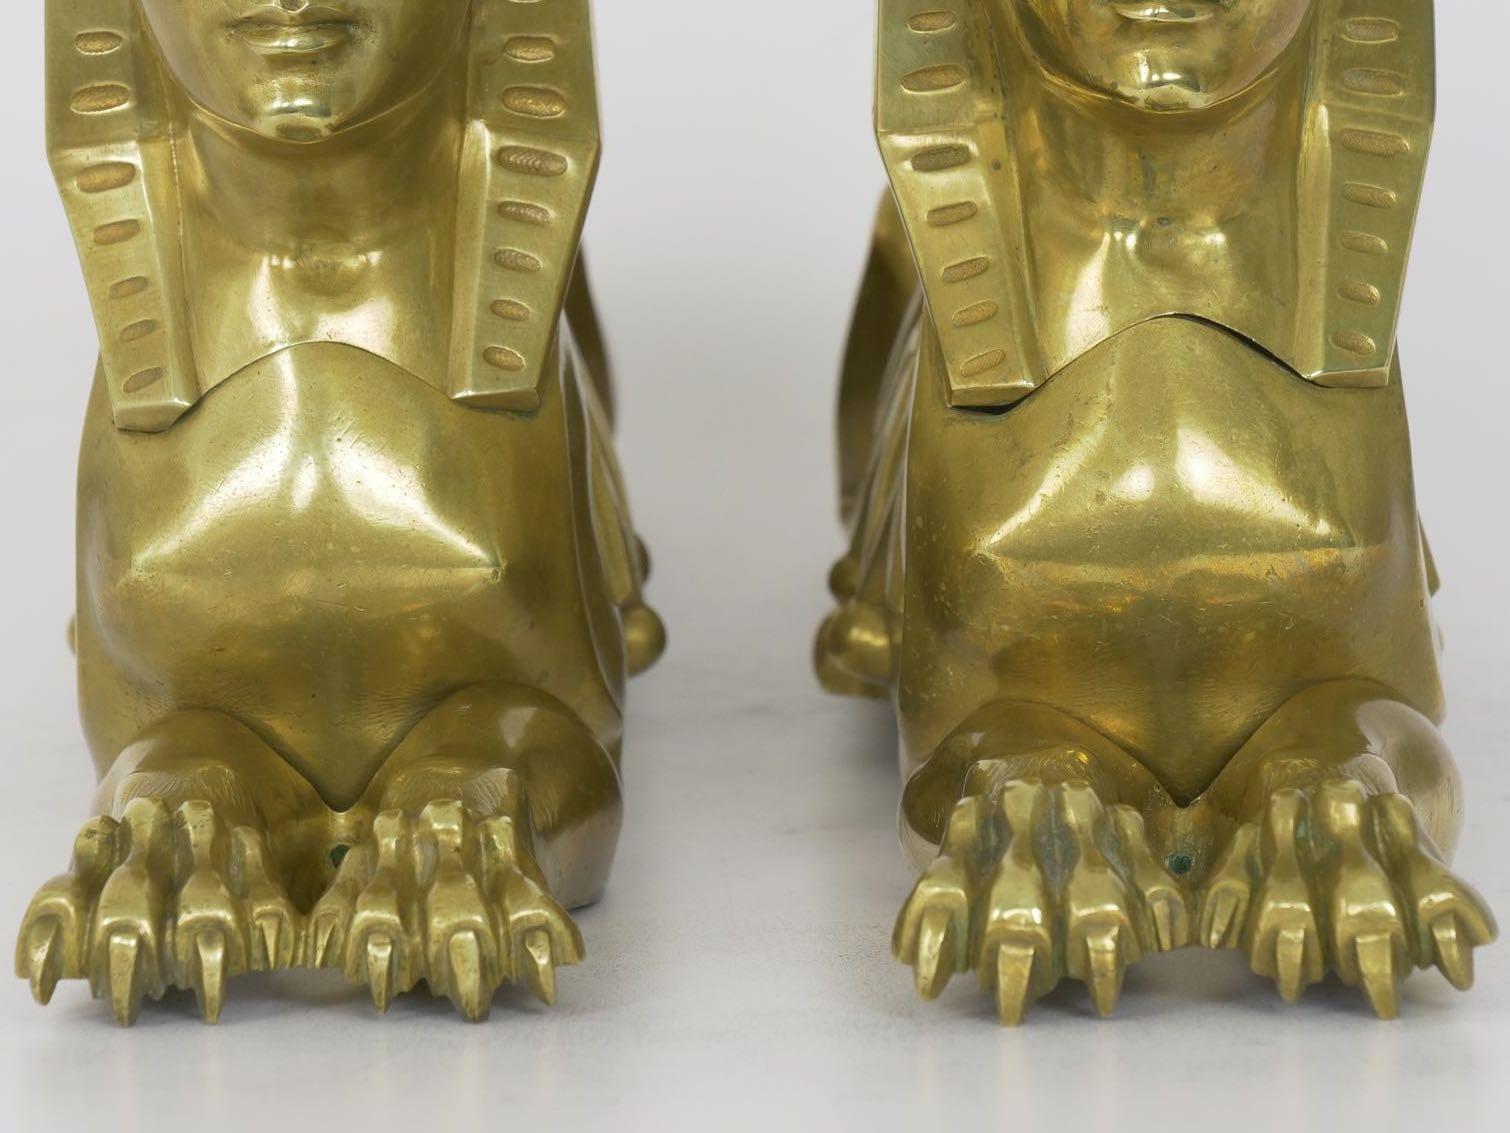 Pair of French Egyptian Revival Sphinx Figural Bronze Sculpture Chenets 12